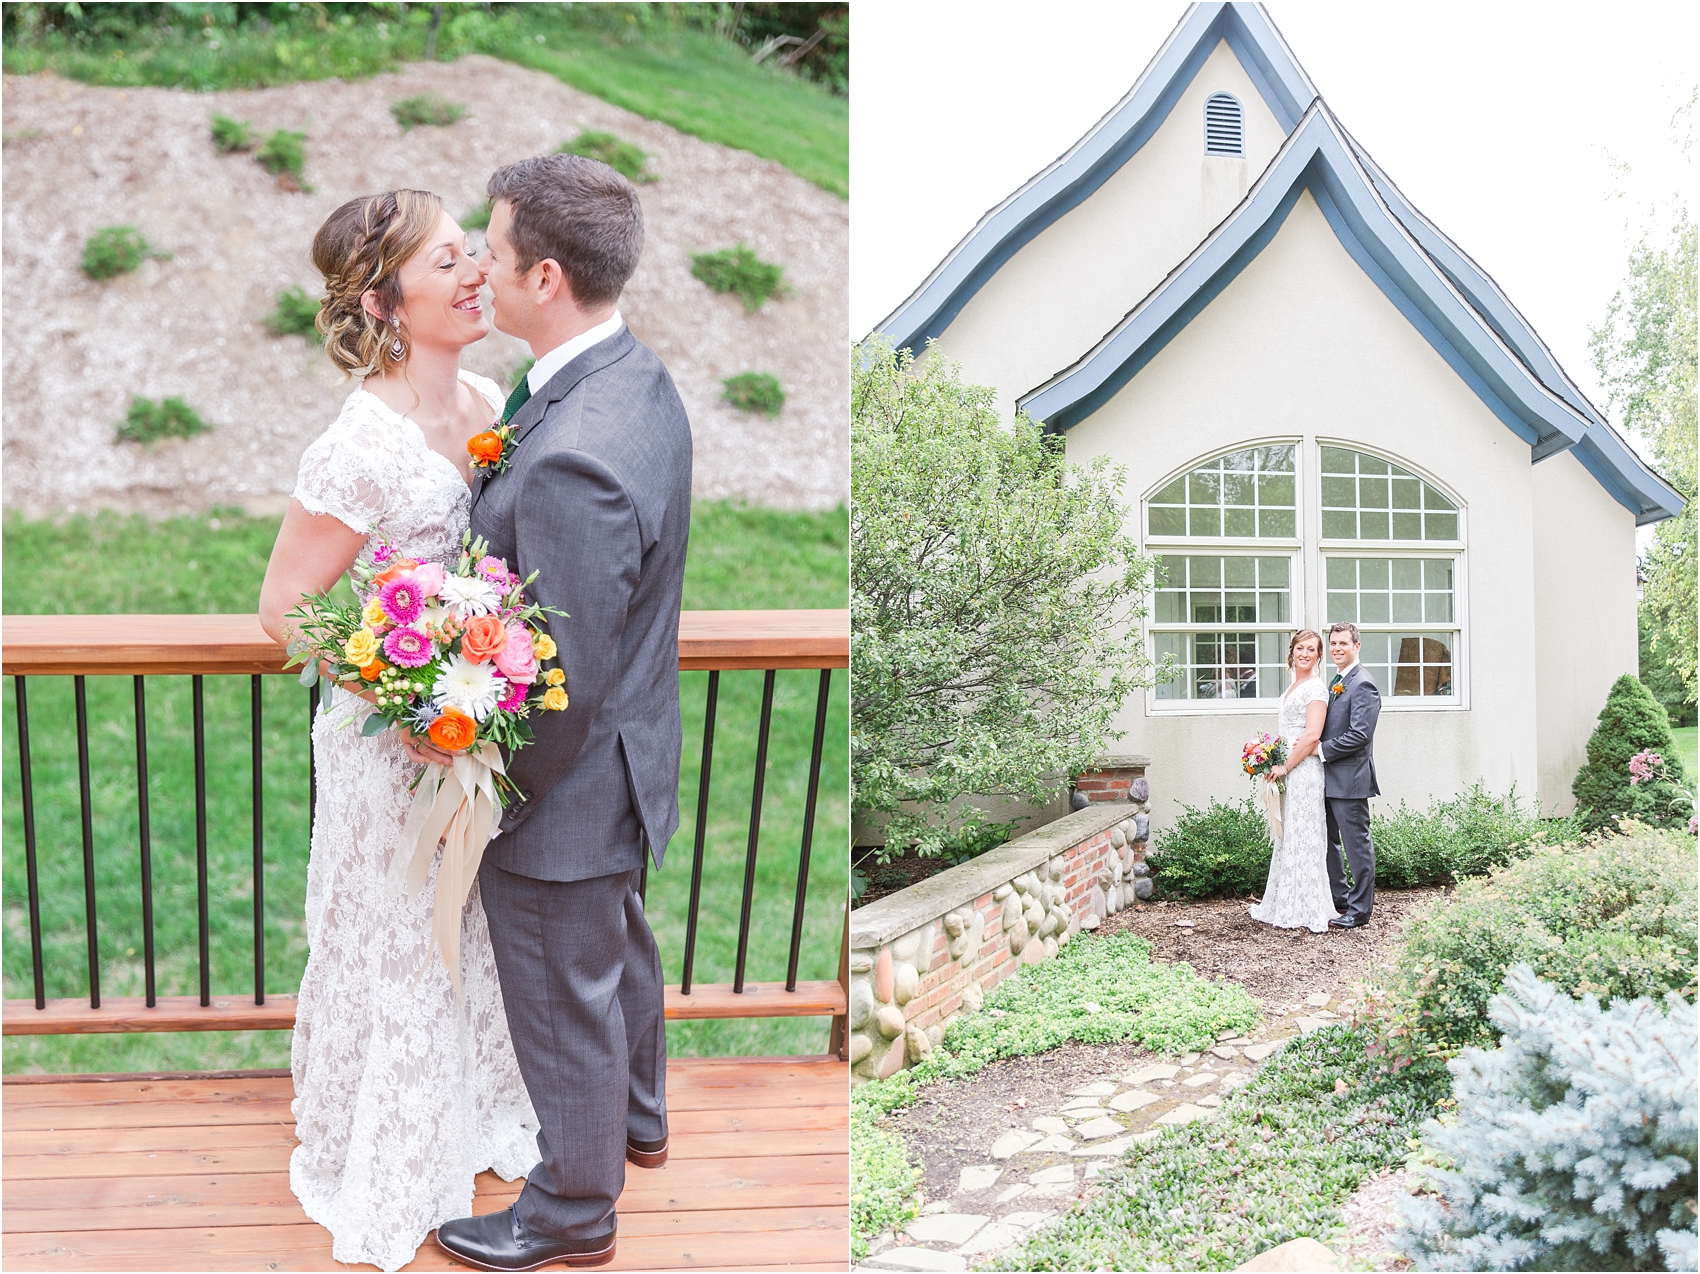 romantic-intimate-backyard-wedding-photos-at-private-estate-in-ann-arbor-mi-by-courtney-carolyn-photography_0047.jpg